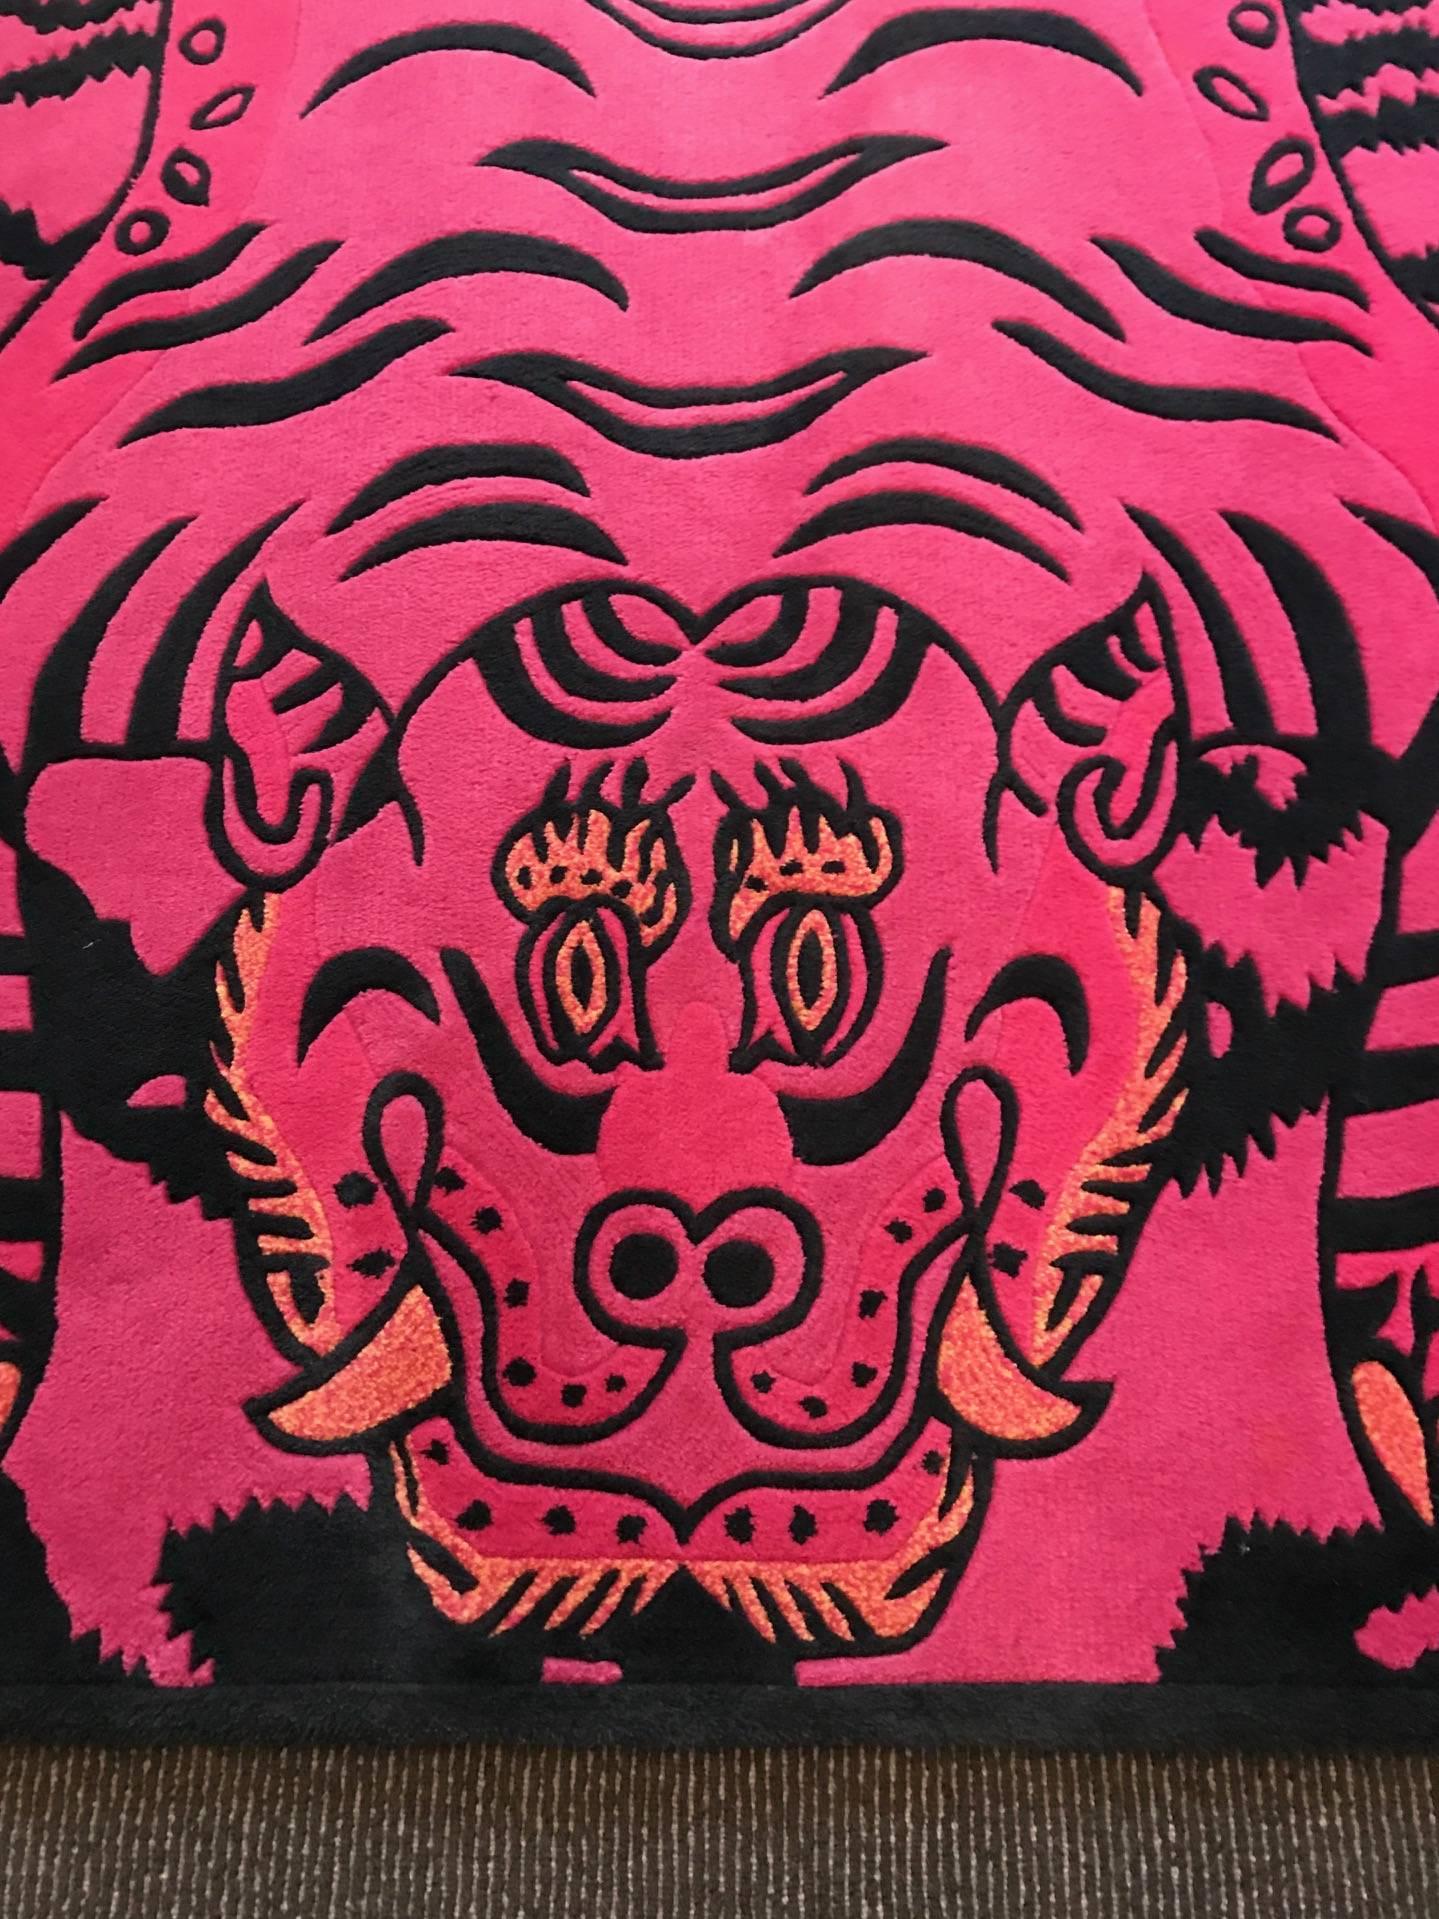 A fantastic area rug custom-made by Swiss architect and designer Carlo Rampazzi for a project in NYC. A new and modern interpretation of traditional Tibetan tiger carpet, the rug is of amazing black and deep pink color and woven in very high